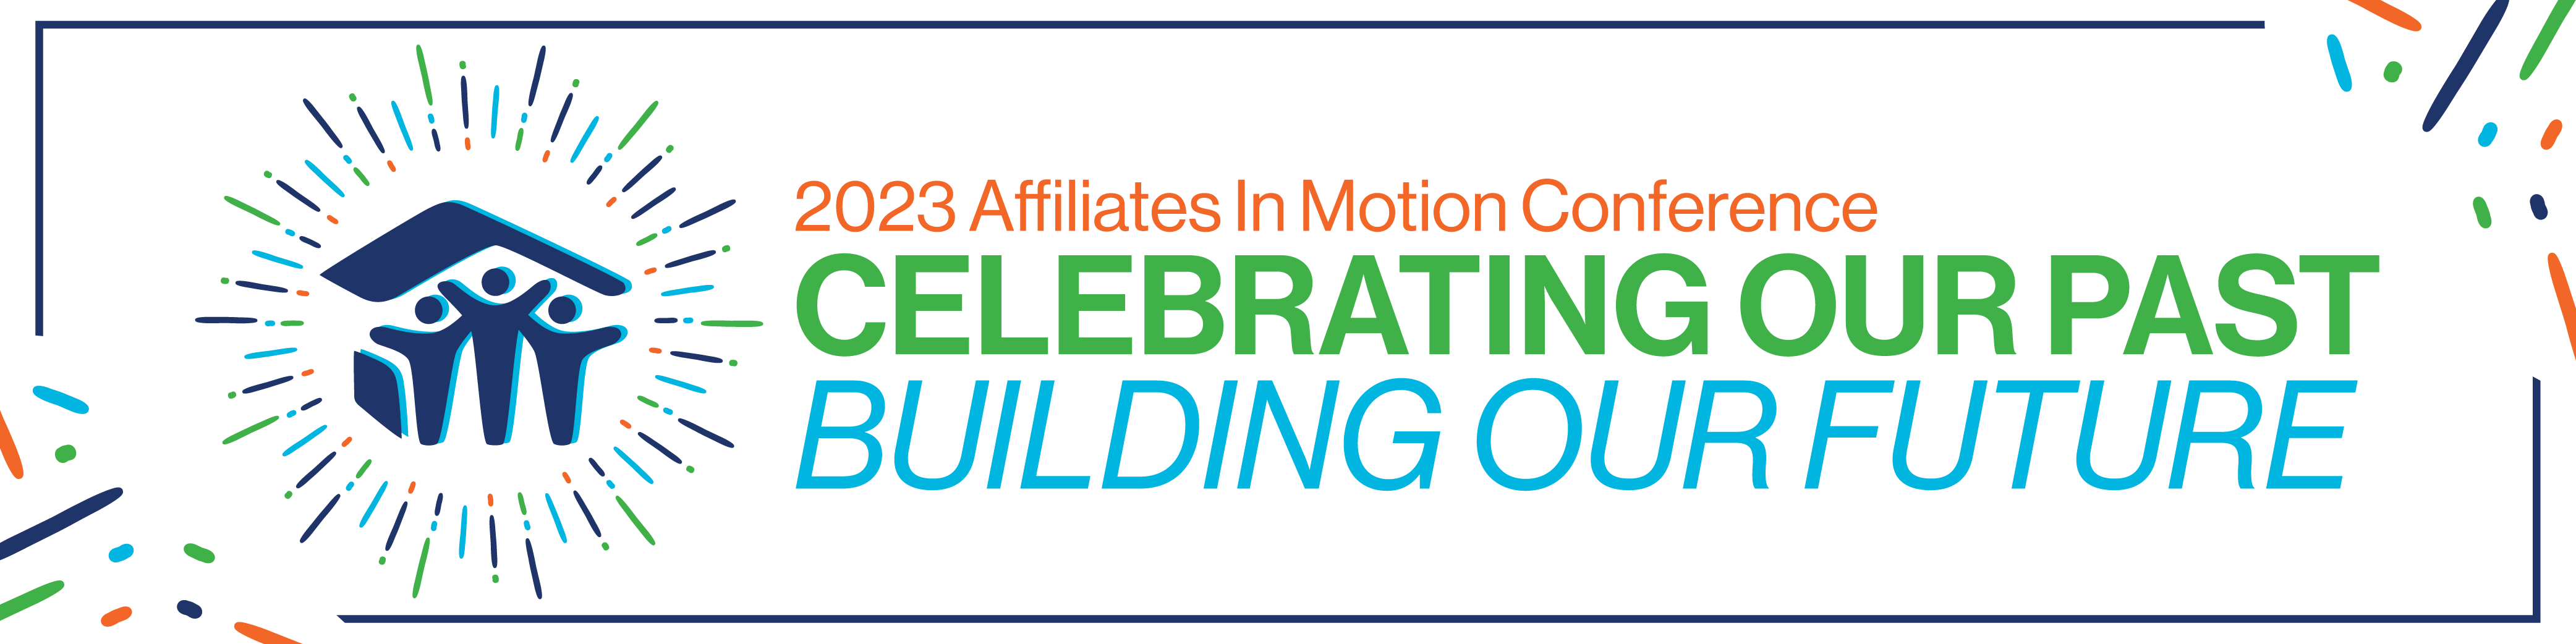 2023 Affiliates In Motion Conference